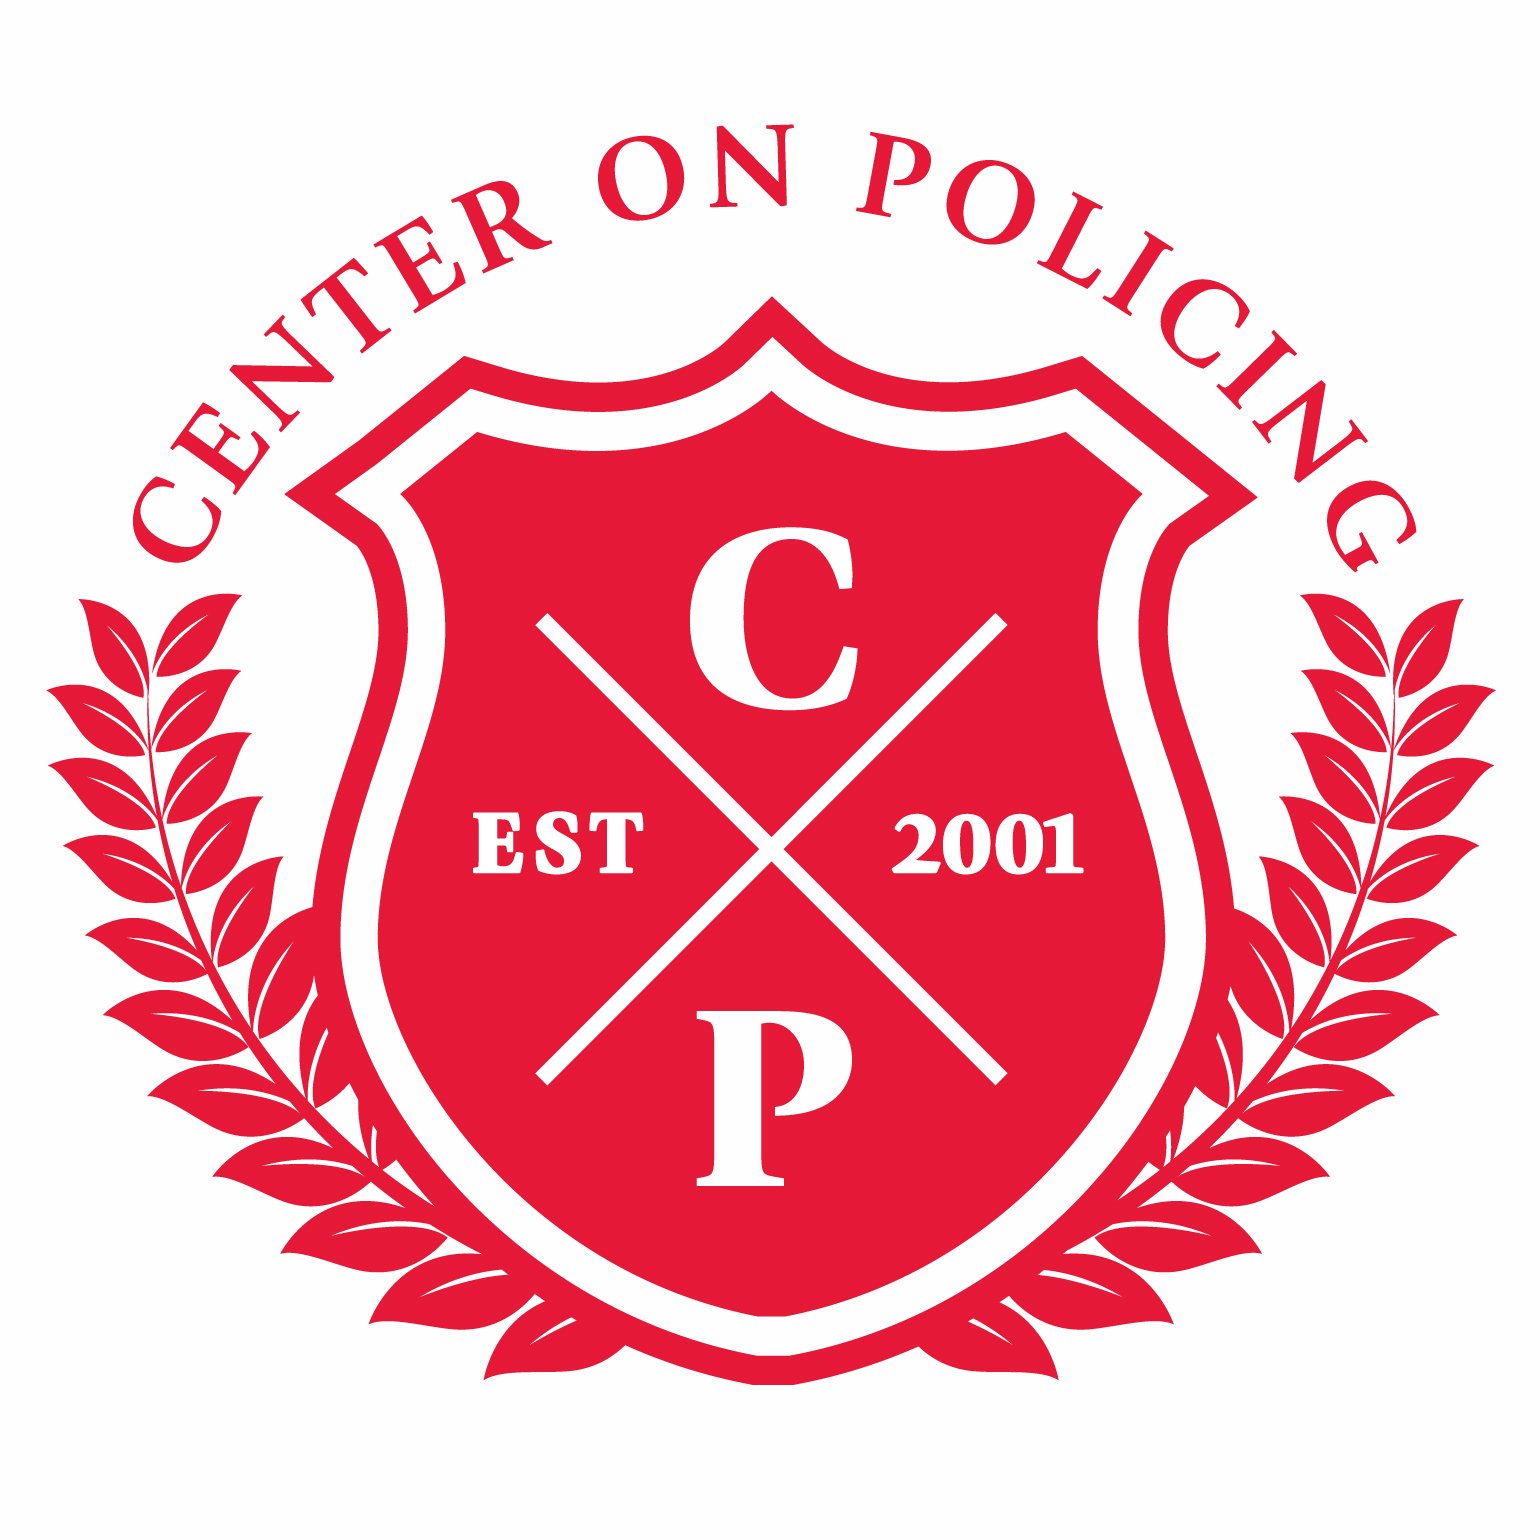 Our mission is to integrate research and evidence-based best practices into police operations, education, violence reduction, community policing, and policy.